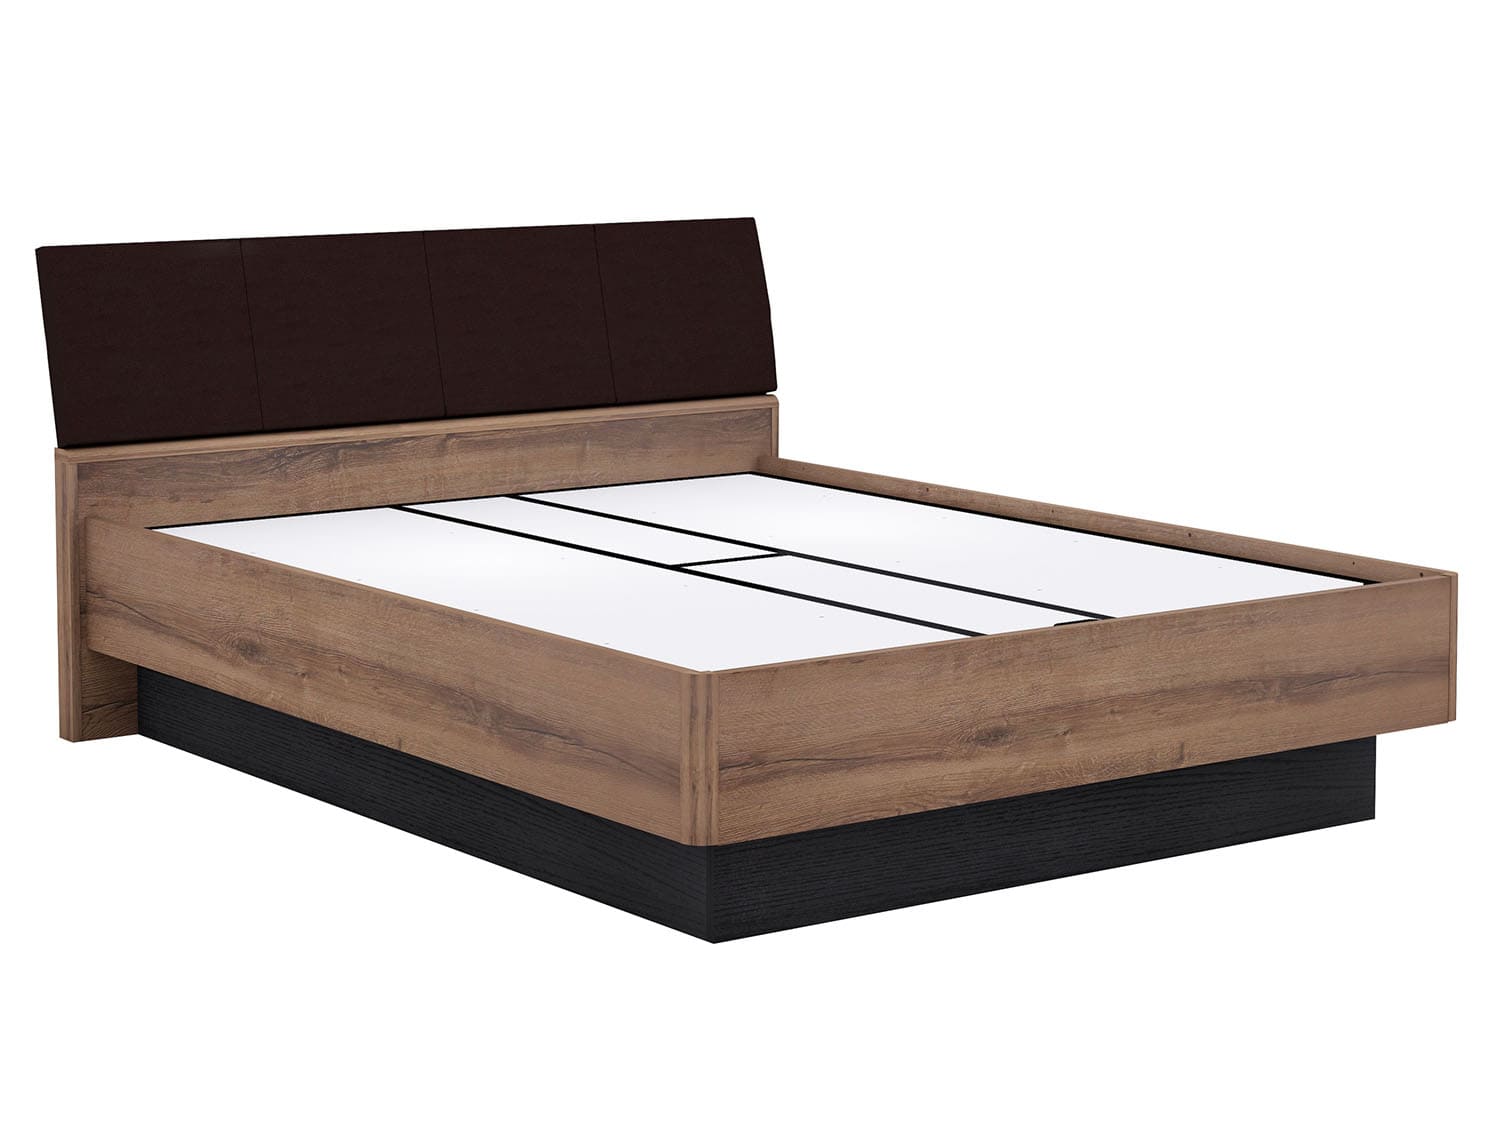 Full Lift On Storage King Size Bed, King Lift Storage Bed